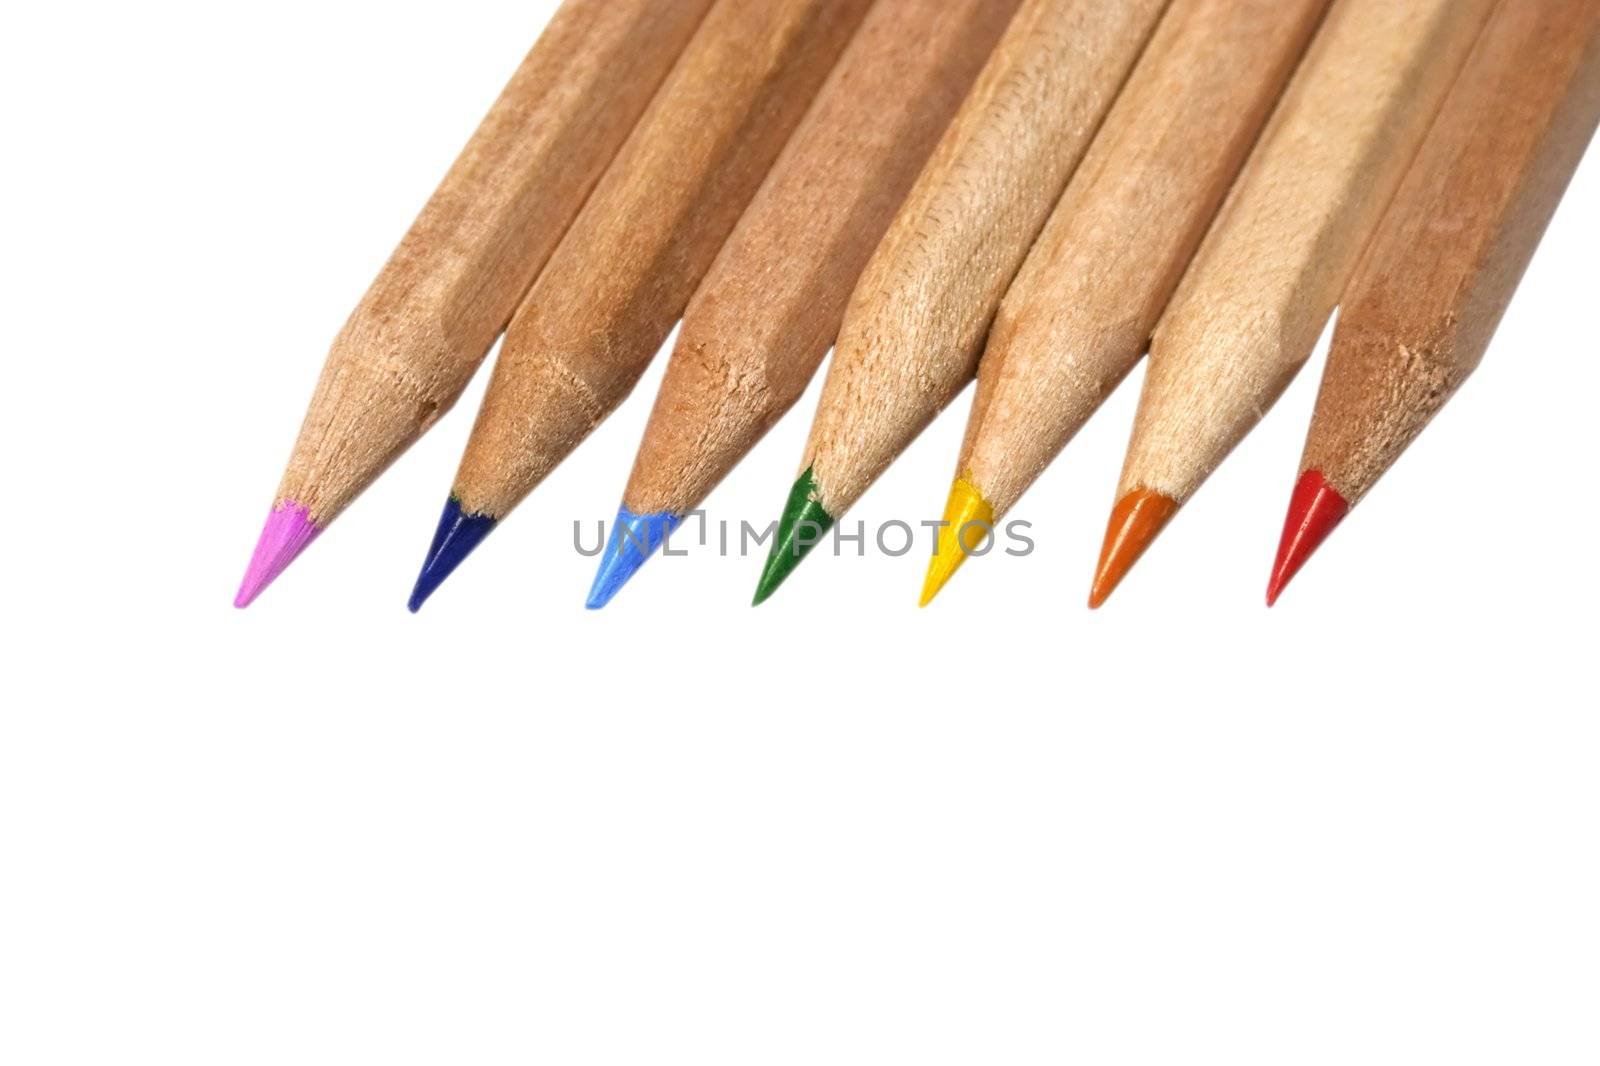 pencils in rainbow colors with clipping path